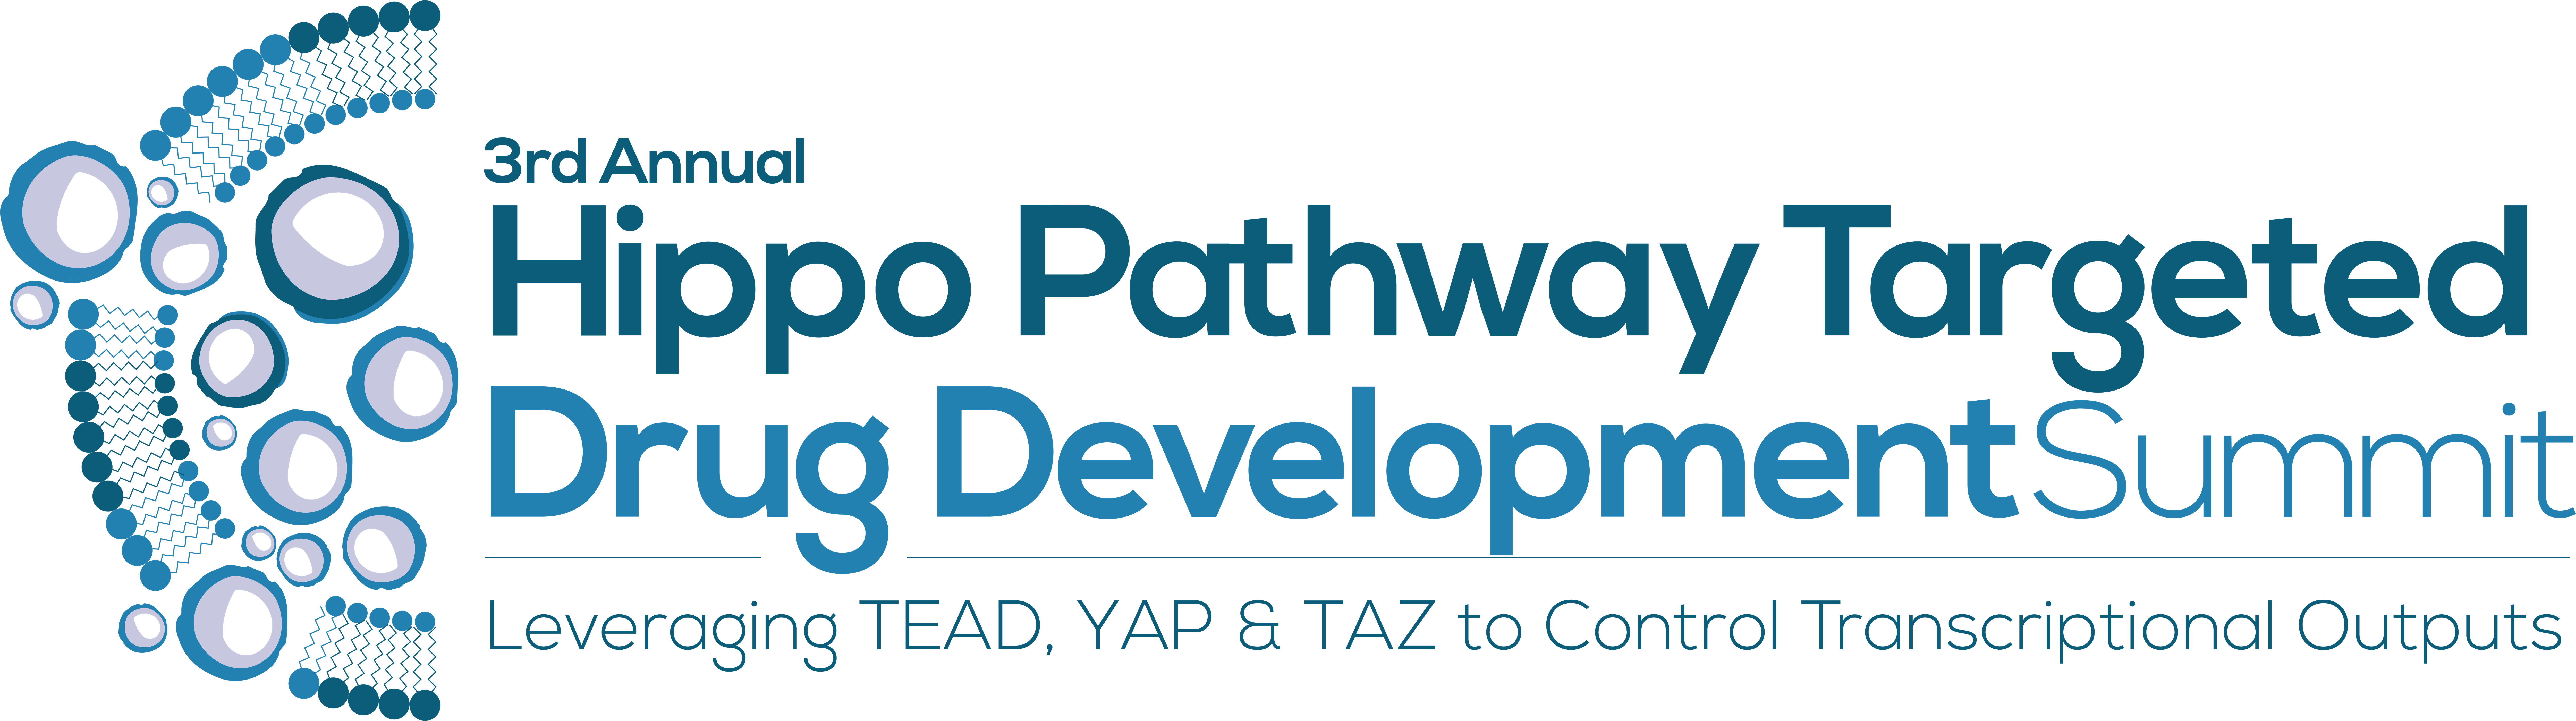 Next in Series - 3rd Annual Hippo Pathway Targeted Drug Development Summit